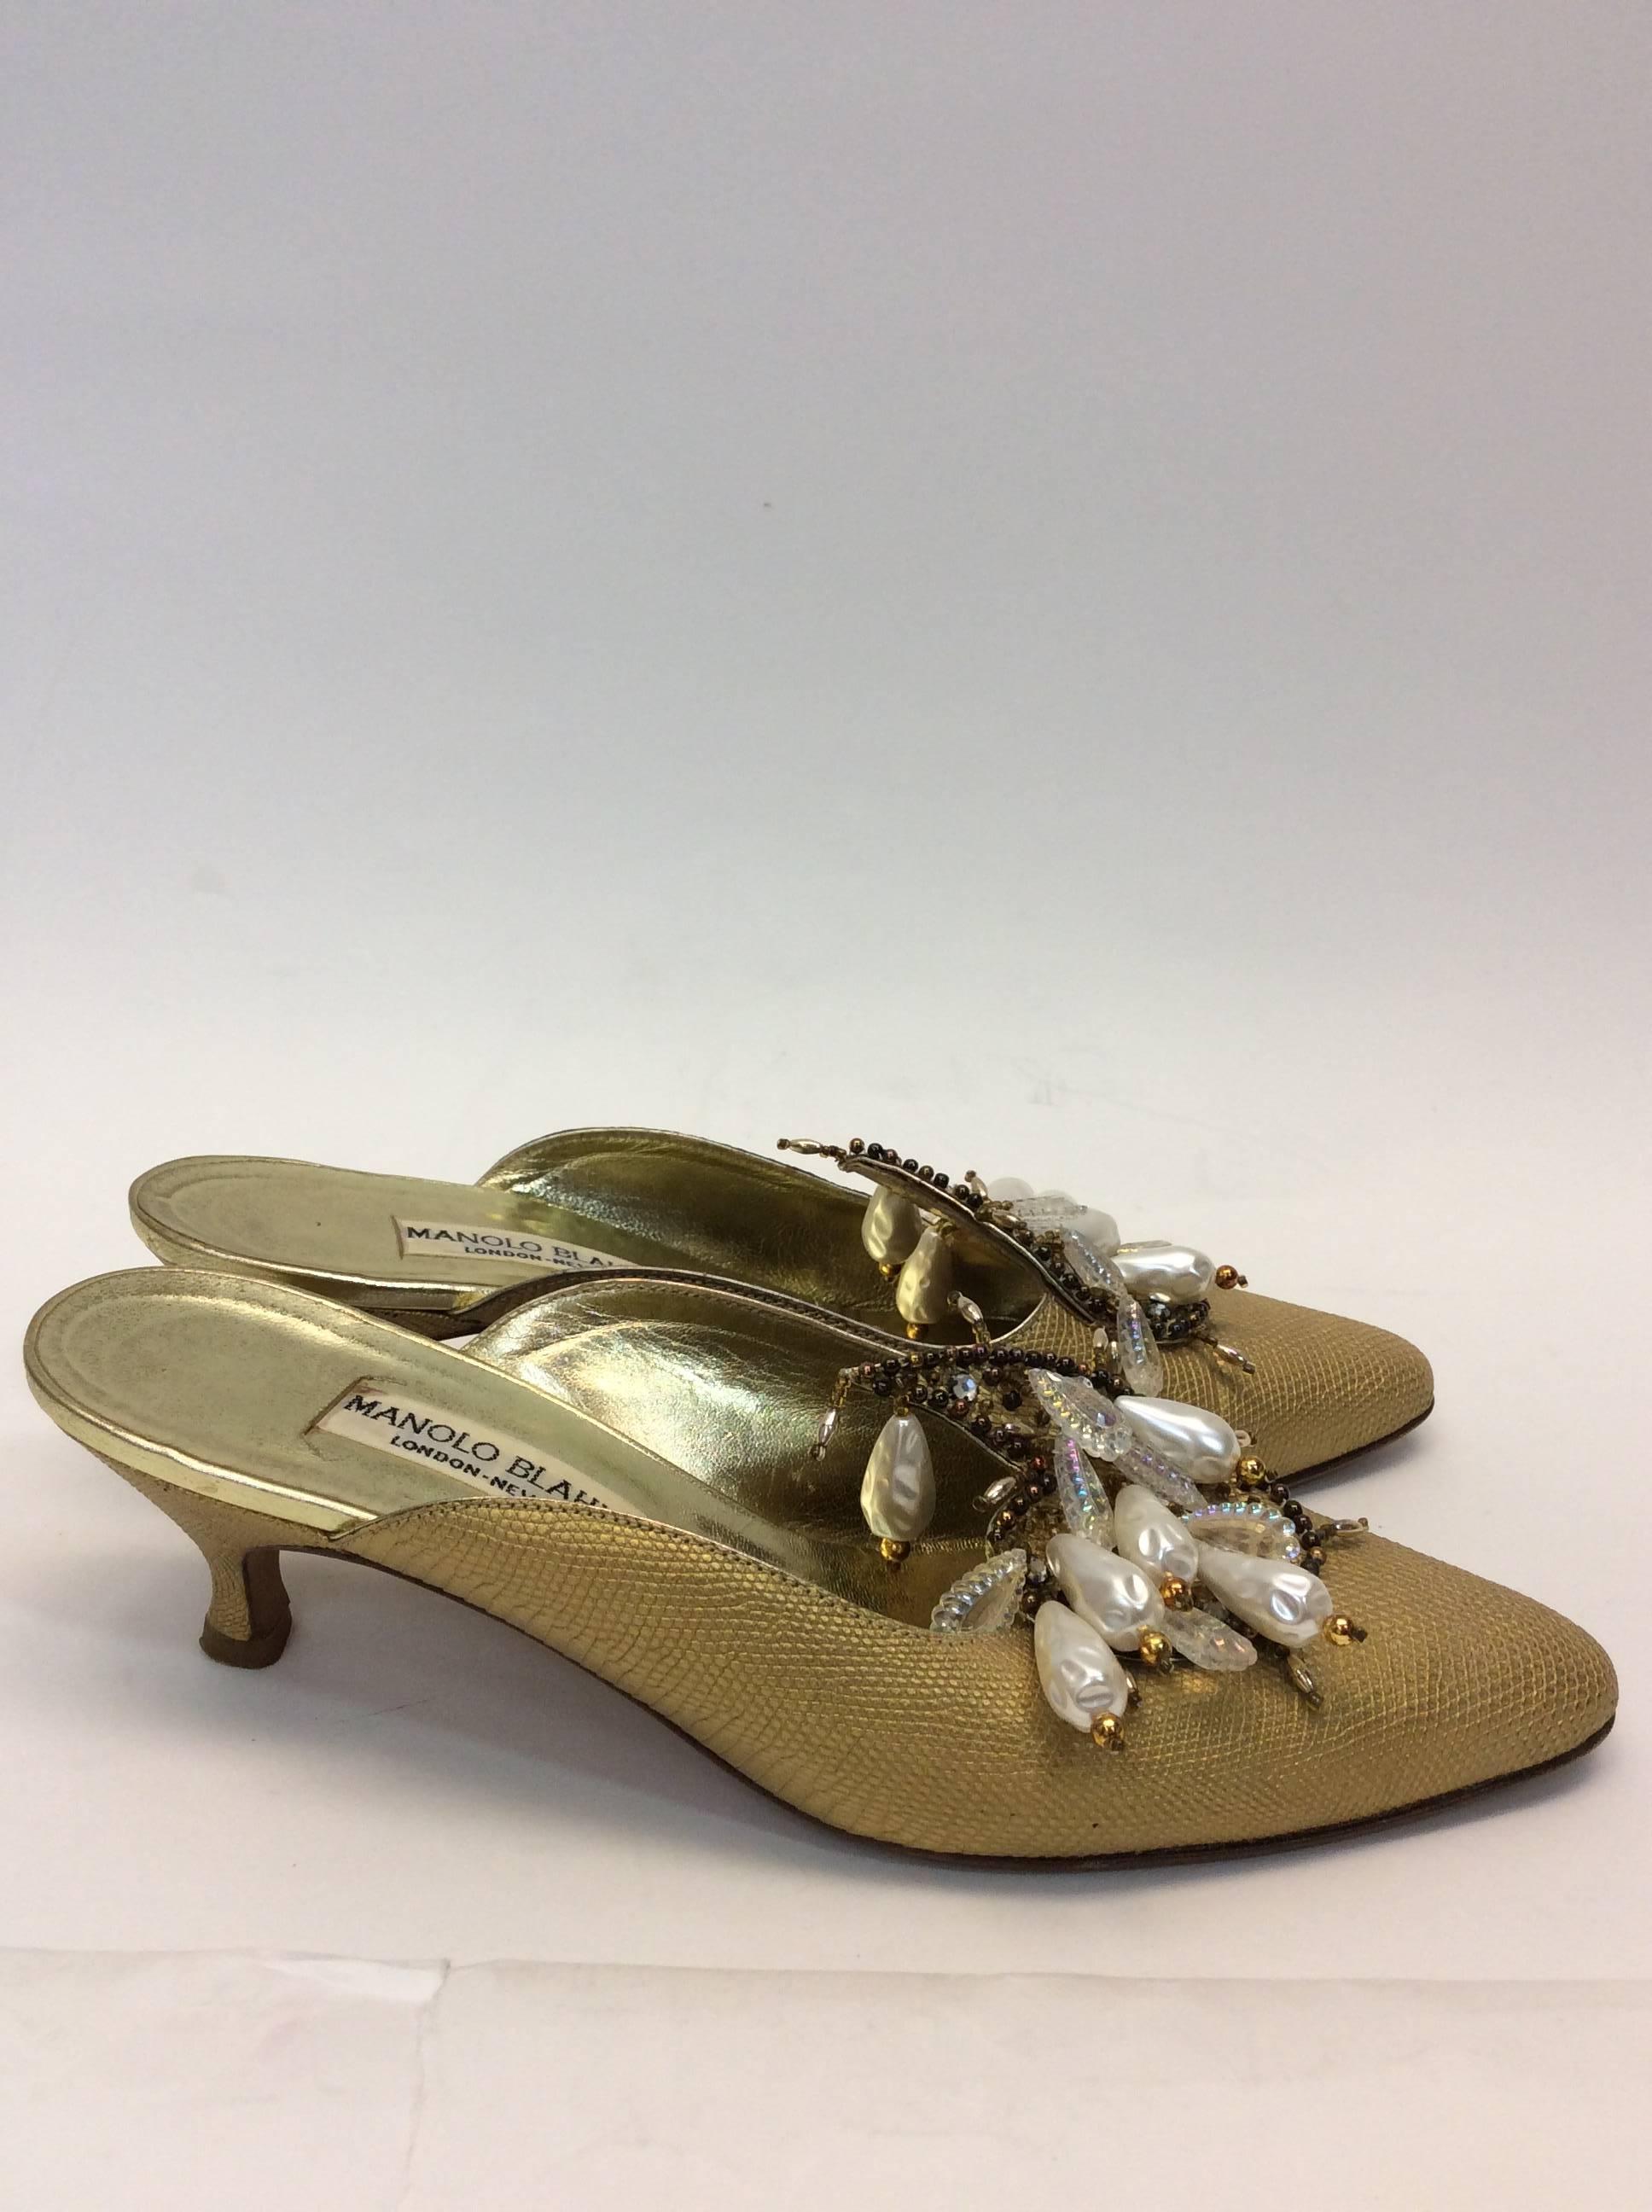 Manolo Blahnik Gold Slides With Pearl Detailing In Excellent Condition For Sale In Narberth, PA